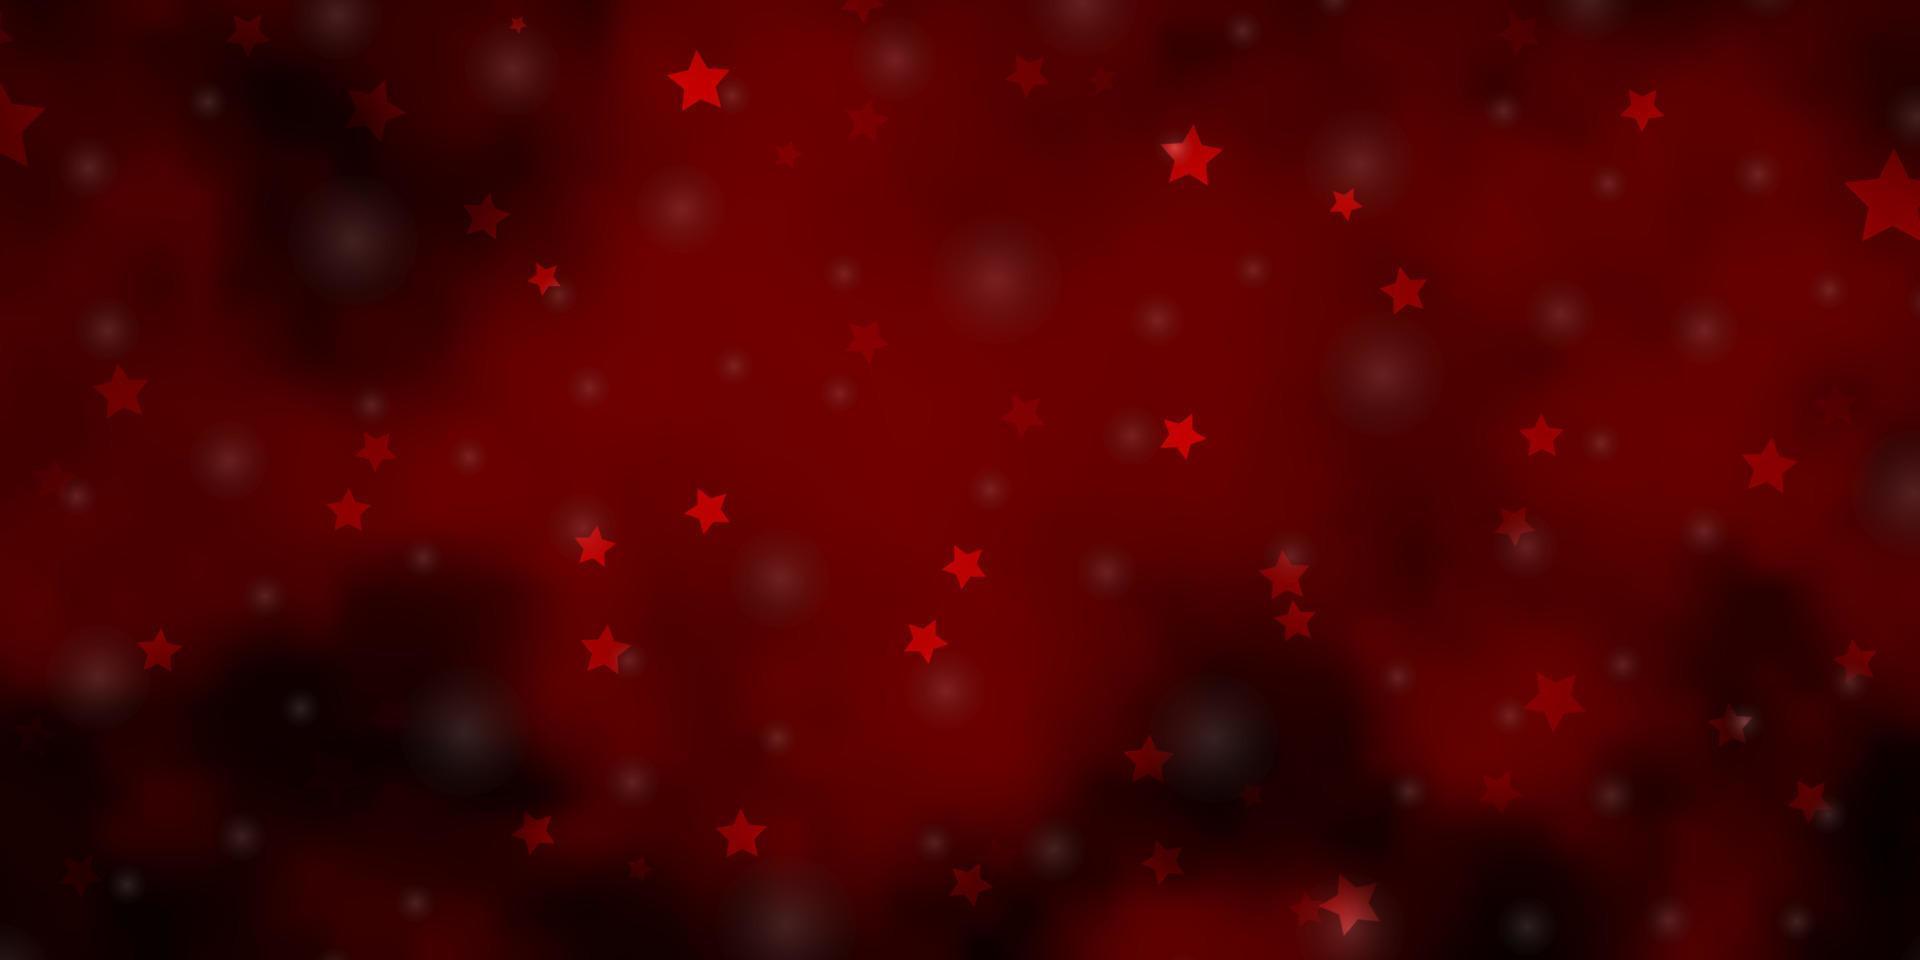 Dark Red vector background with small and big stars.